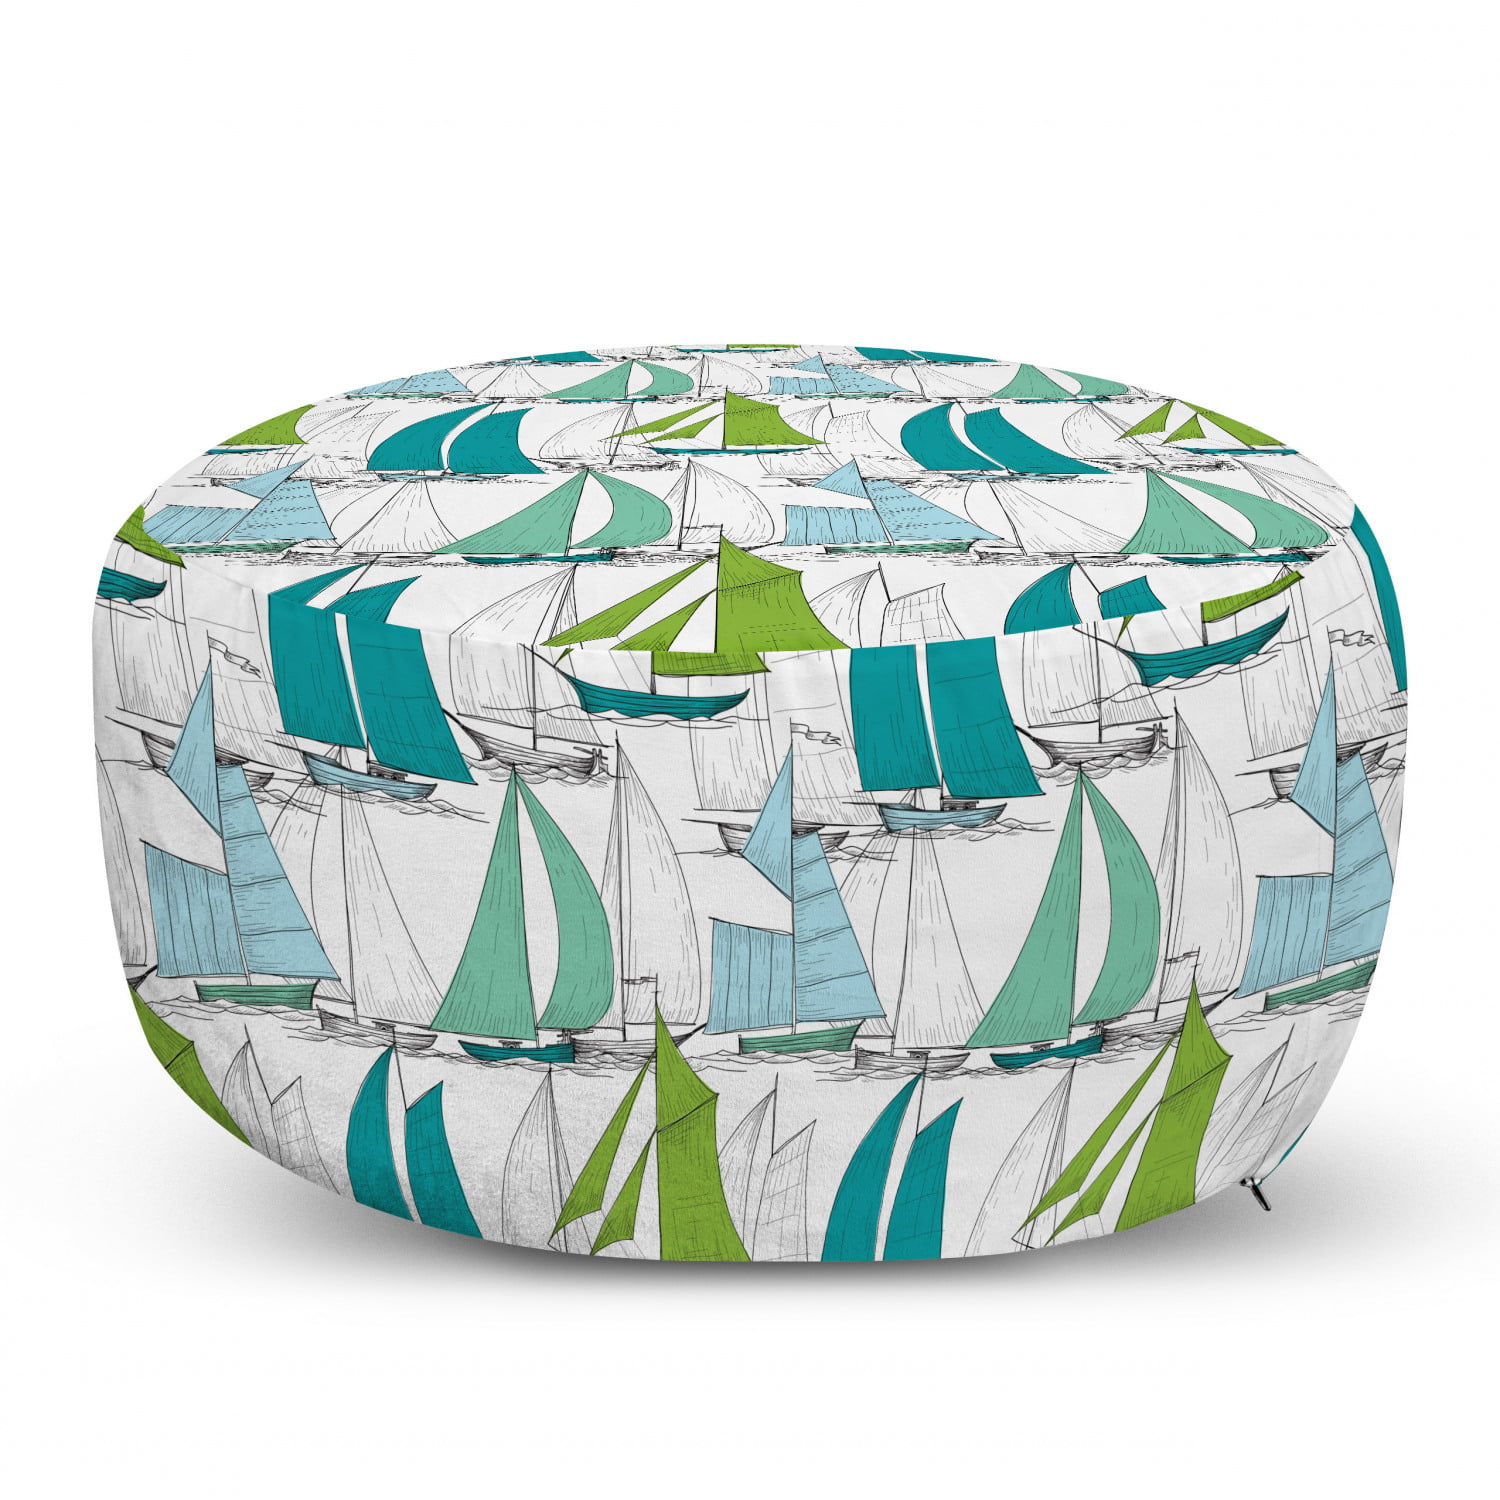 Grey Pale Grey White 25 Ambesonne Anchor Rectangle Pouf Simple with Ocean Inspired Wave Pattern Oceanic Sea Life Under Desk Foot Stool for Living Room Office Ottoman with Cover